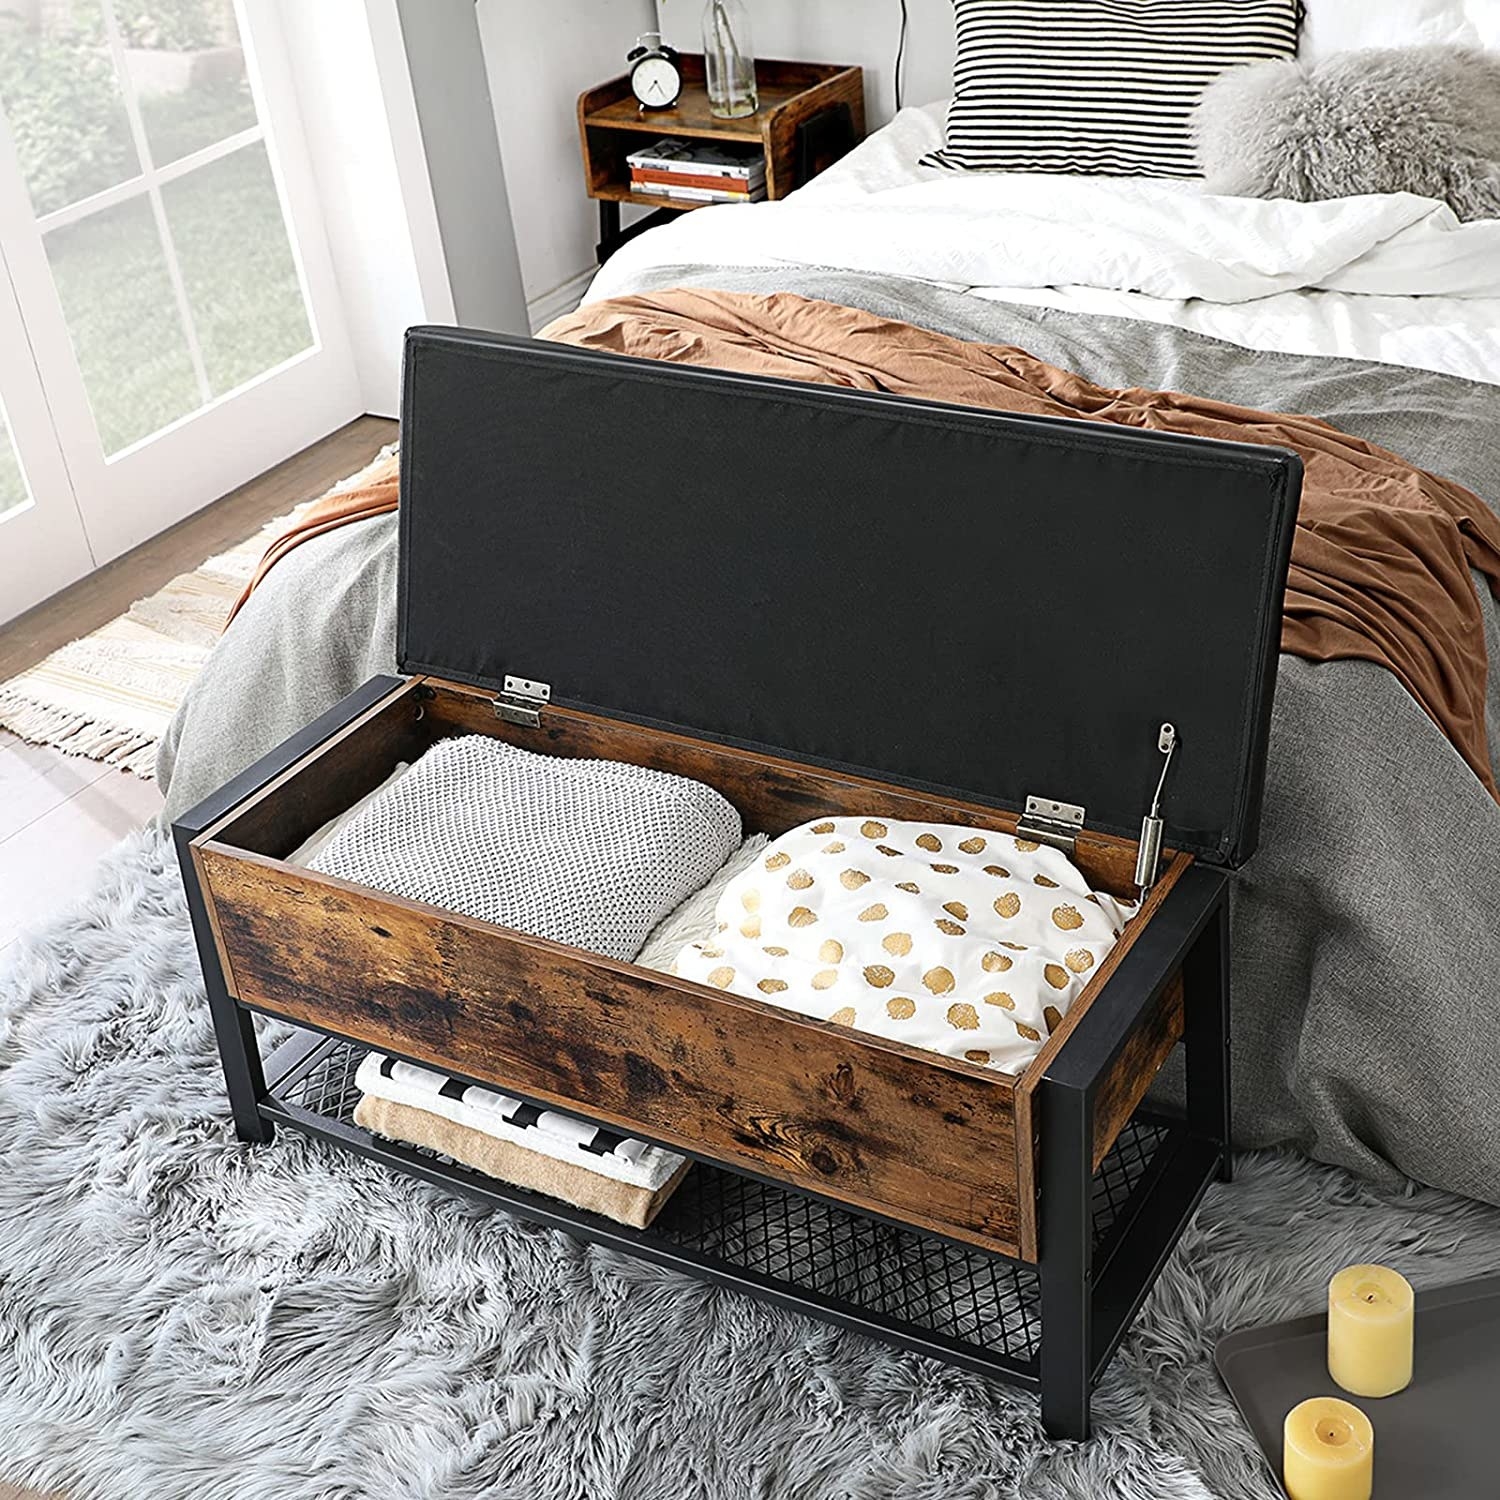 The storage chest at the foot of a bed with linens inside